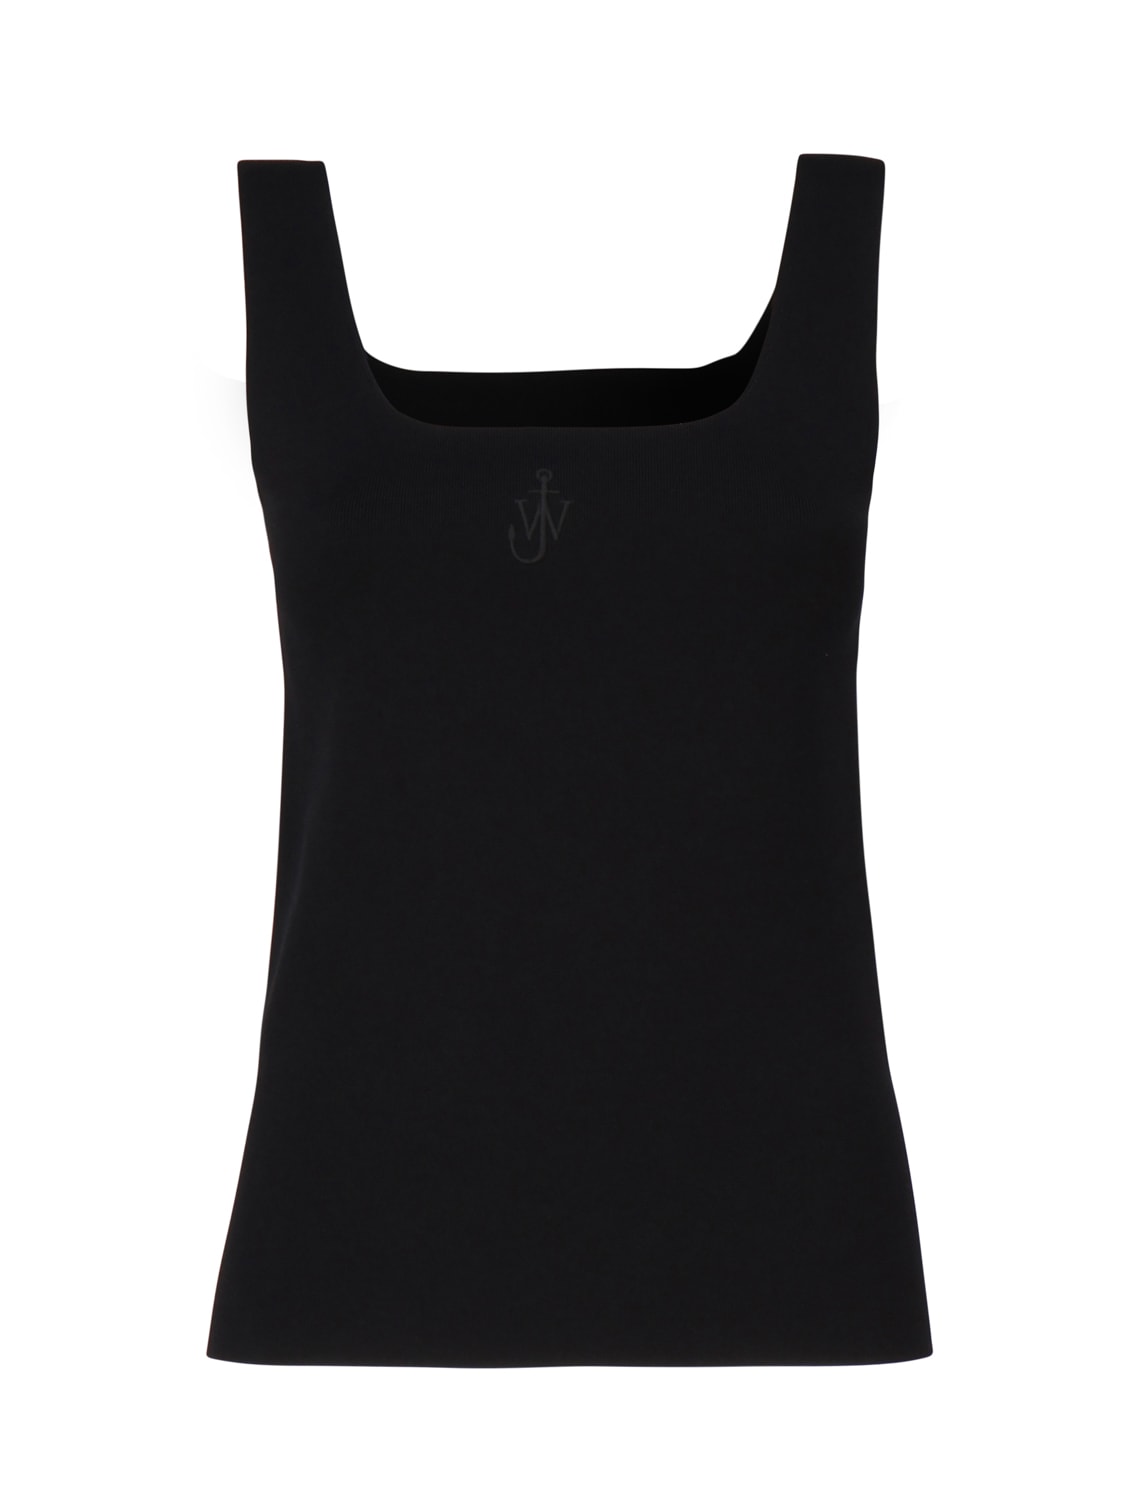 J.W. Anderson Tank Top With Anchor Embroidery